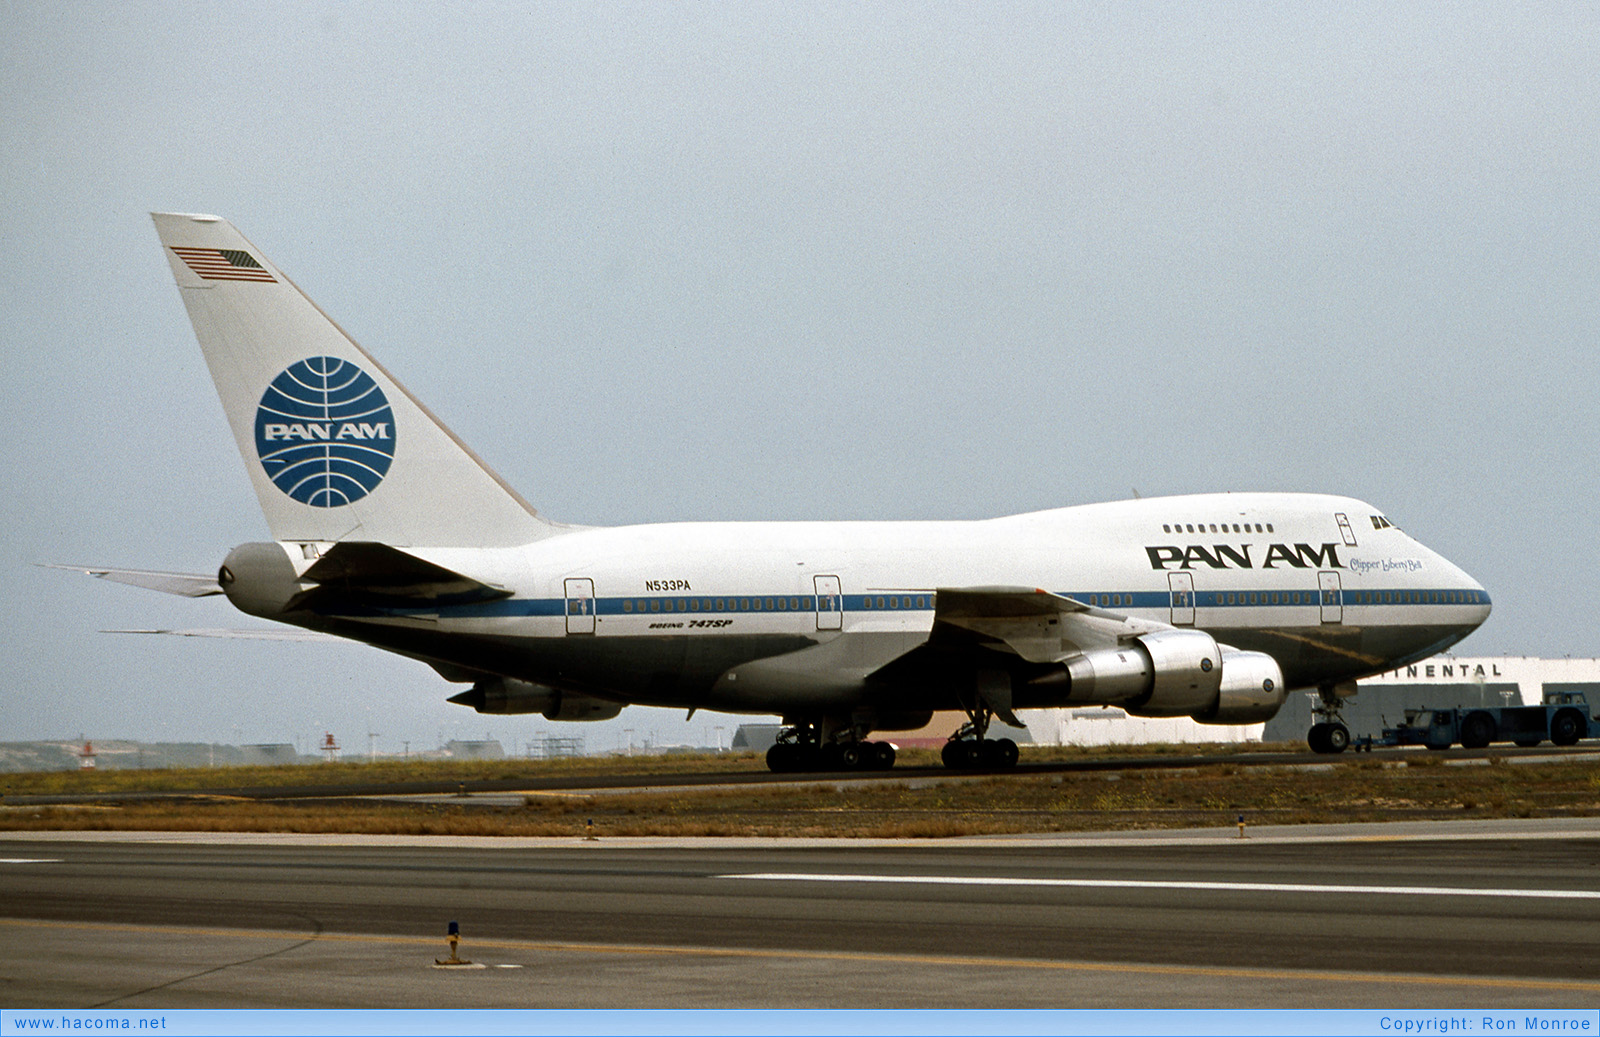 Foto von N533PA - Pan Am Clipper Freedom / Liberty Bell / New Horizons / Young America / San Francisco - Los Angeles International Airport - 05.1976